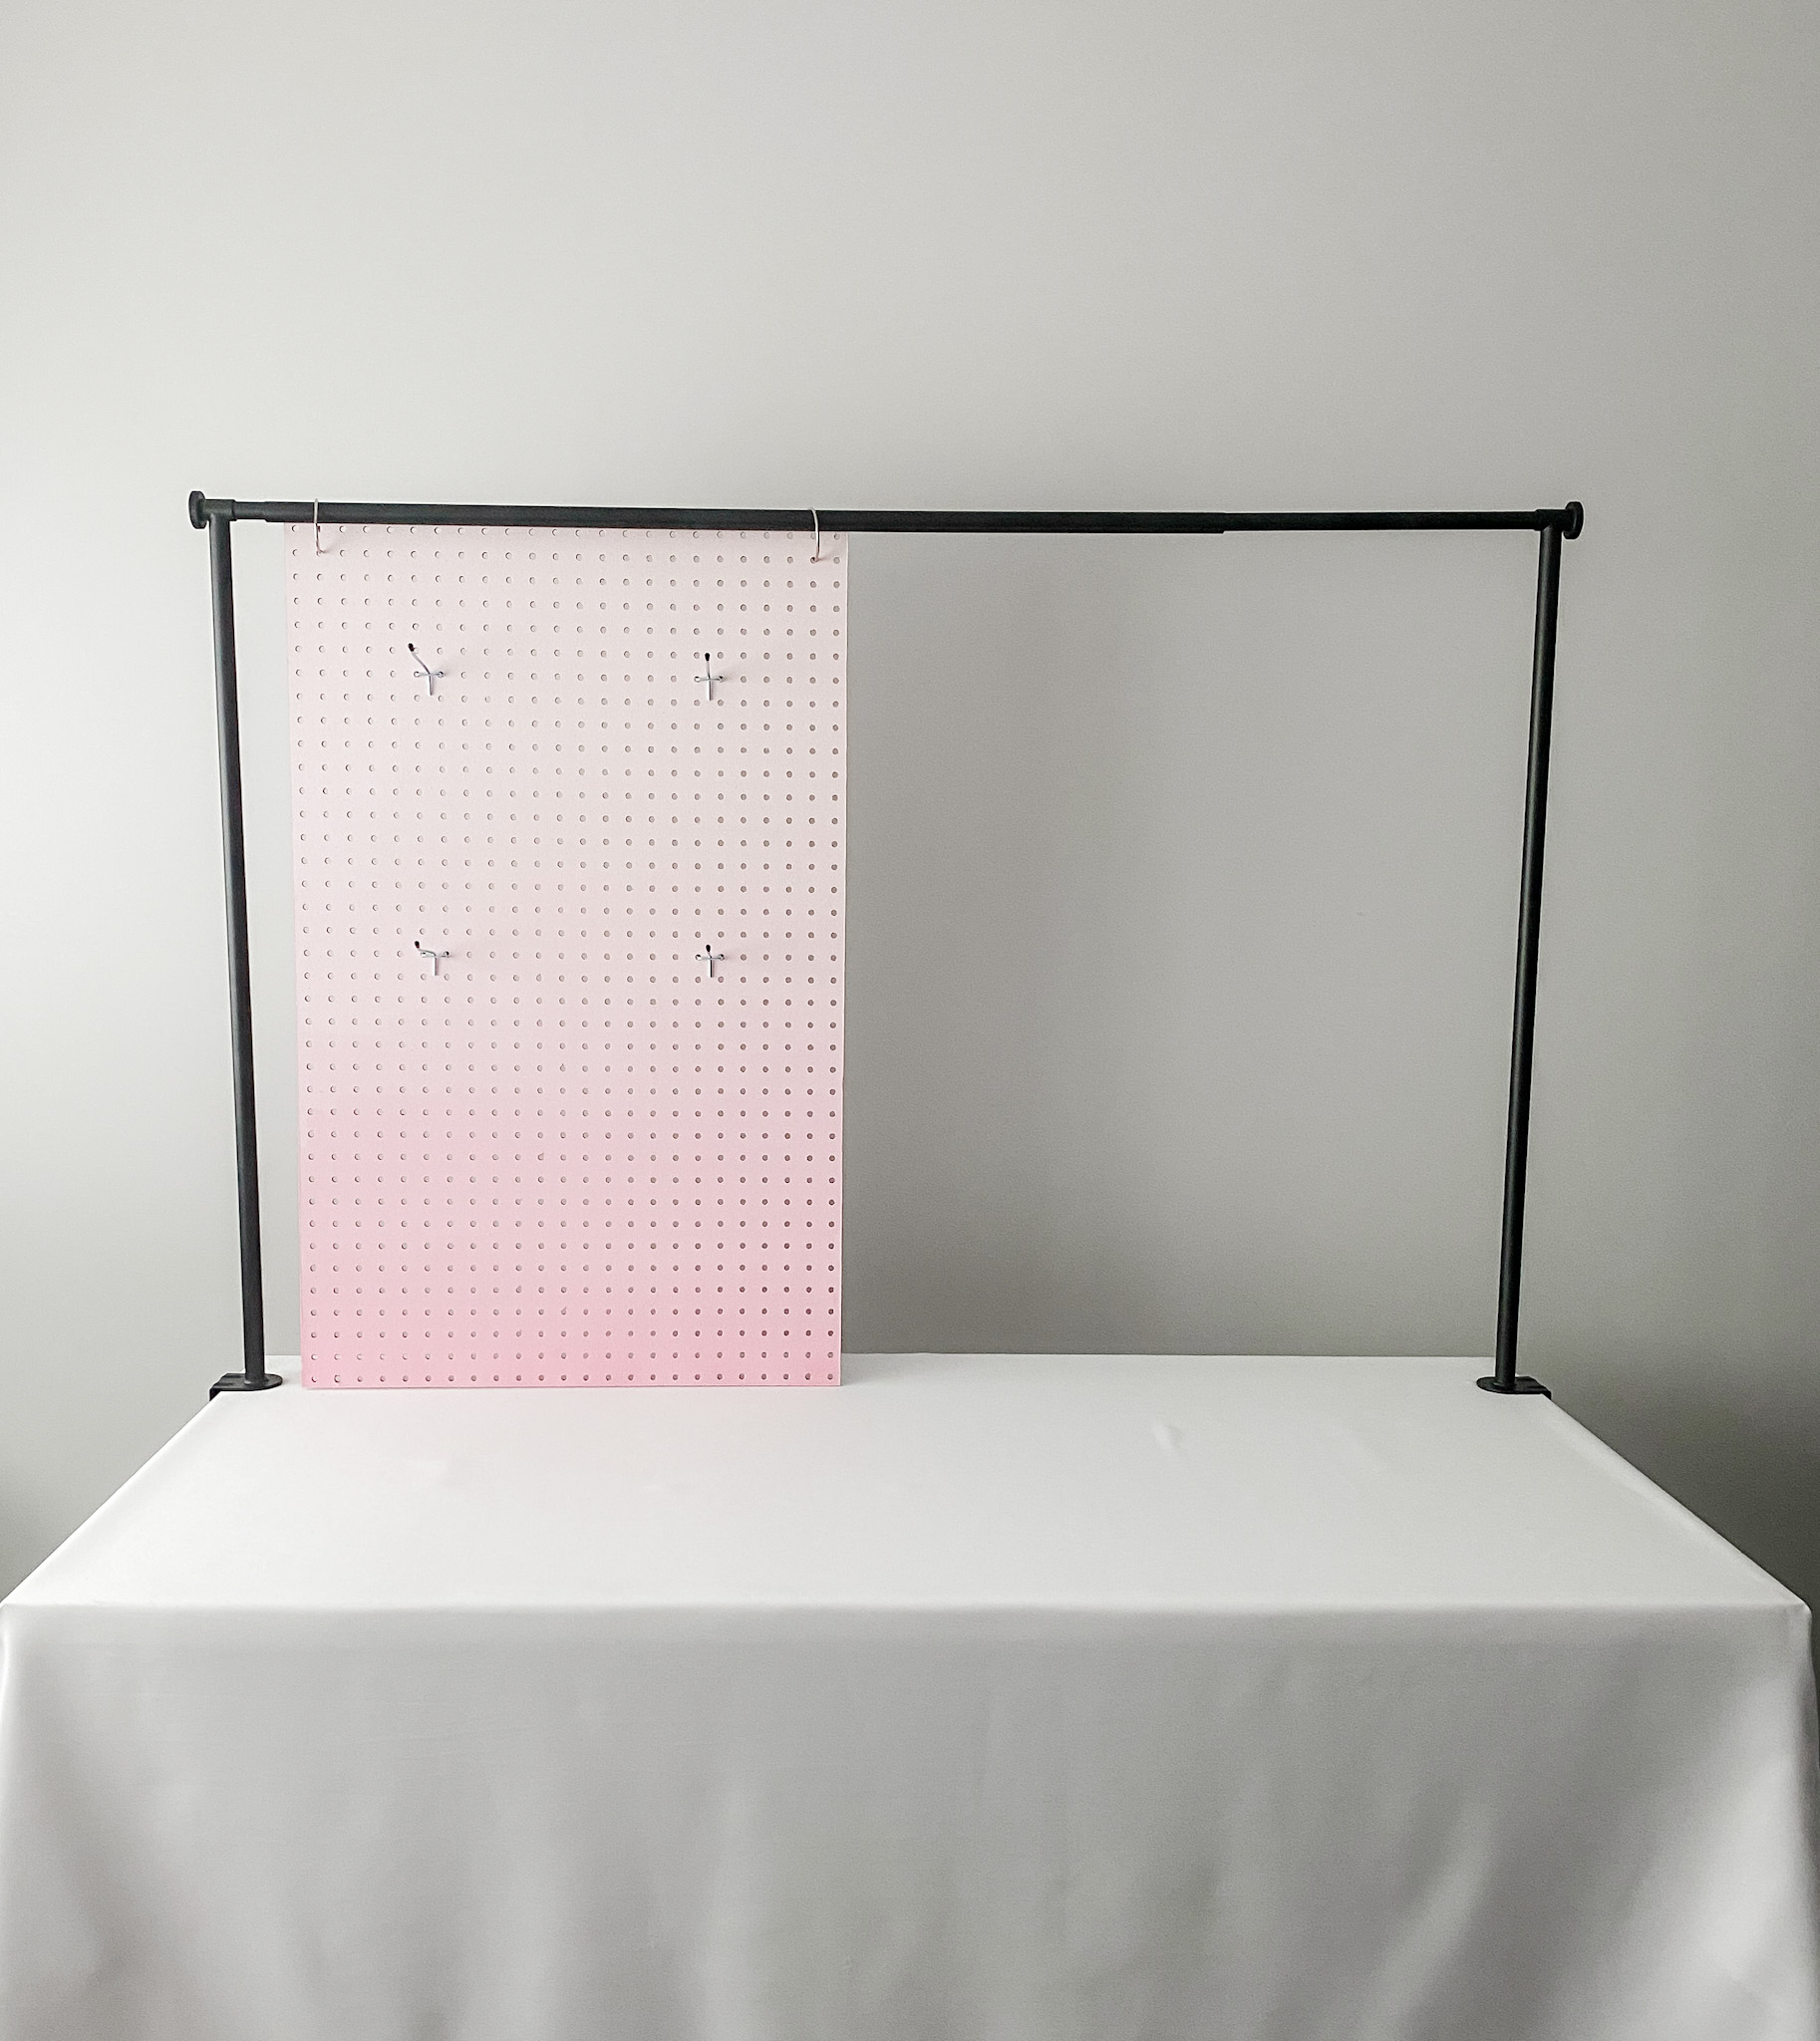 Peg board for hanging space